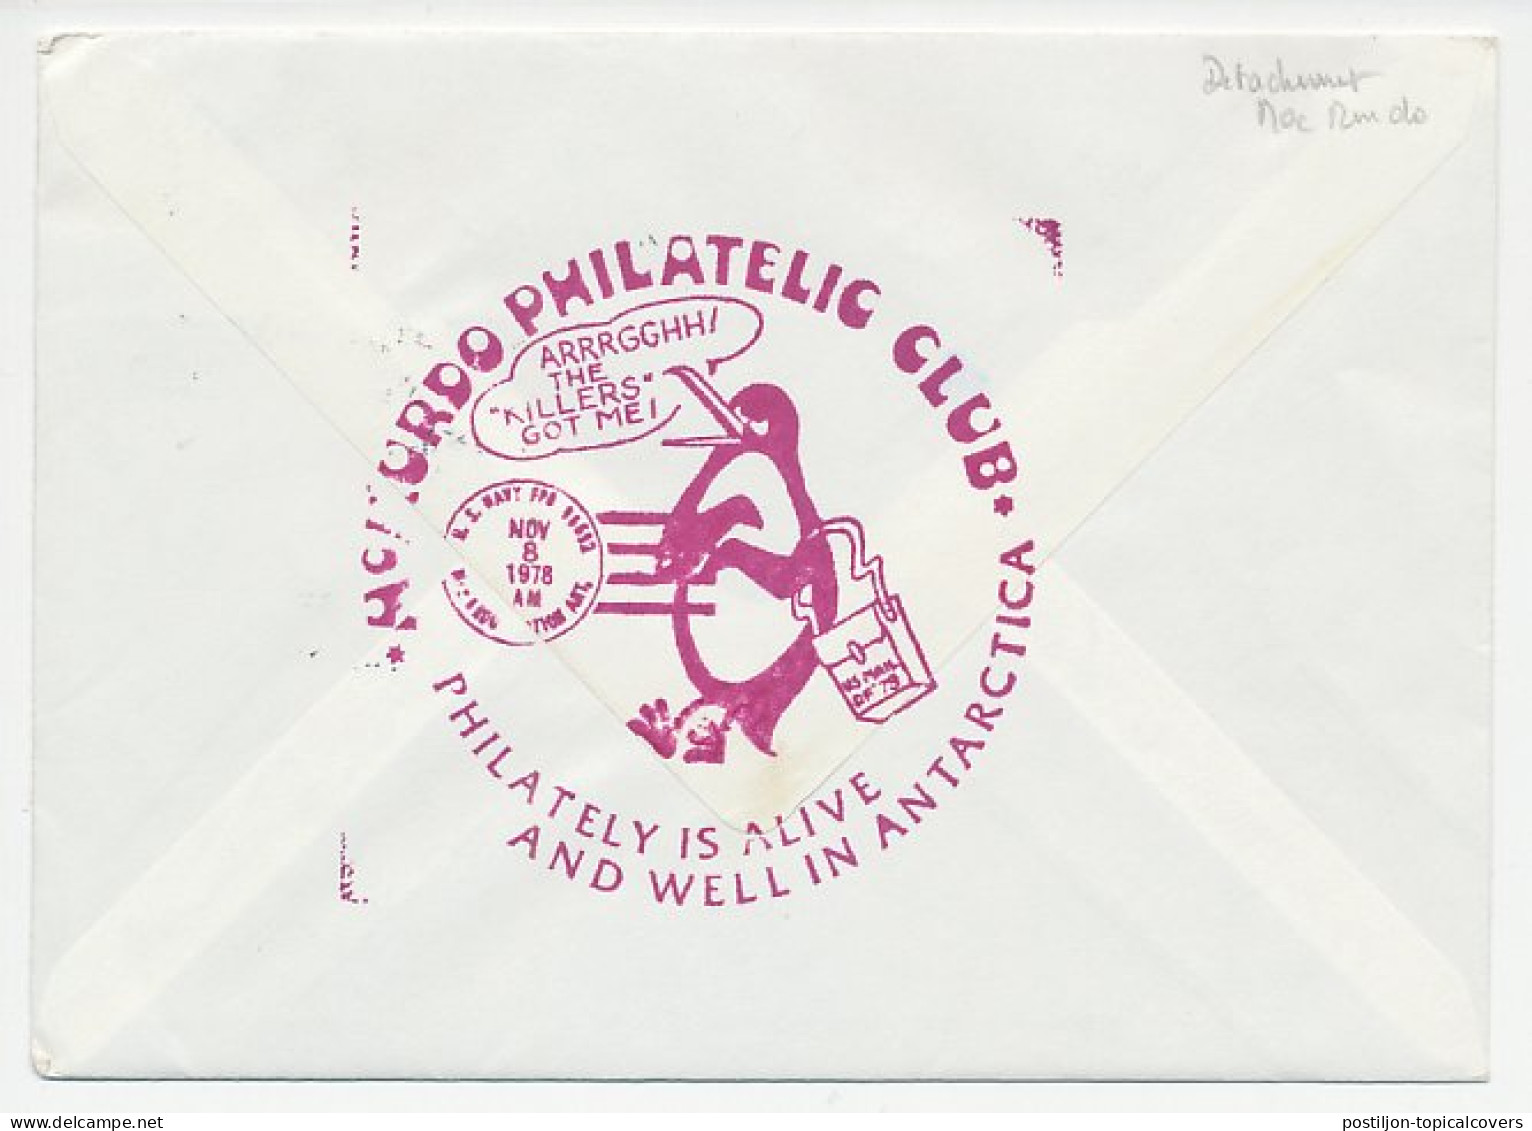 Cover / Postmark USA 1979 Antarctic Expedition - Operation Deep Freeze - Arktis Expeditionen